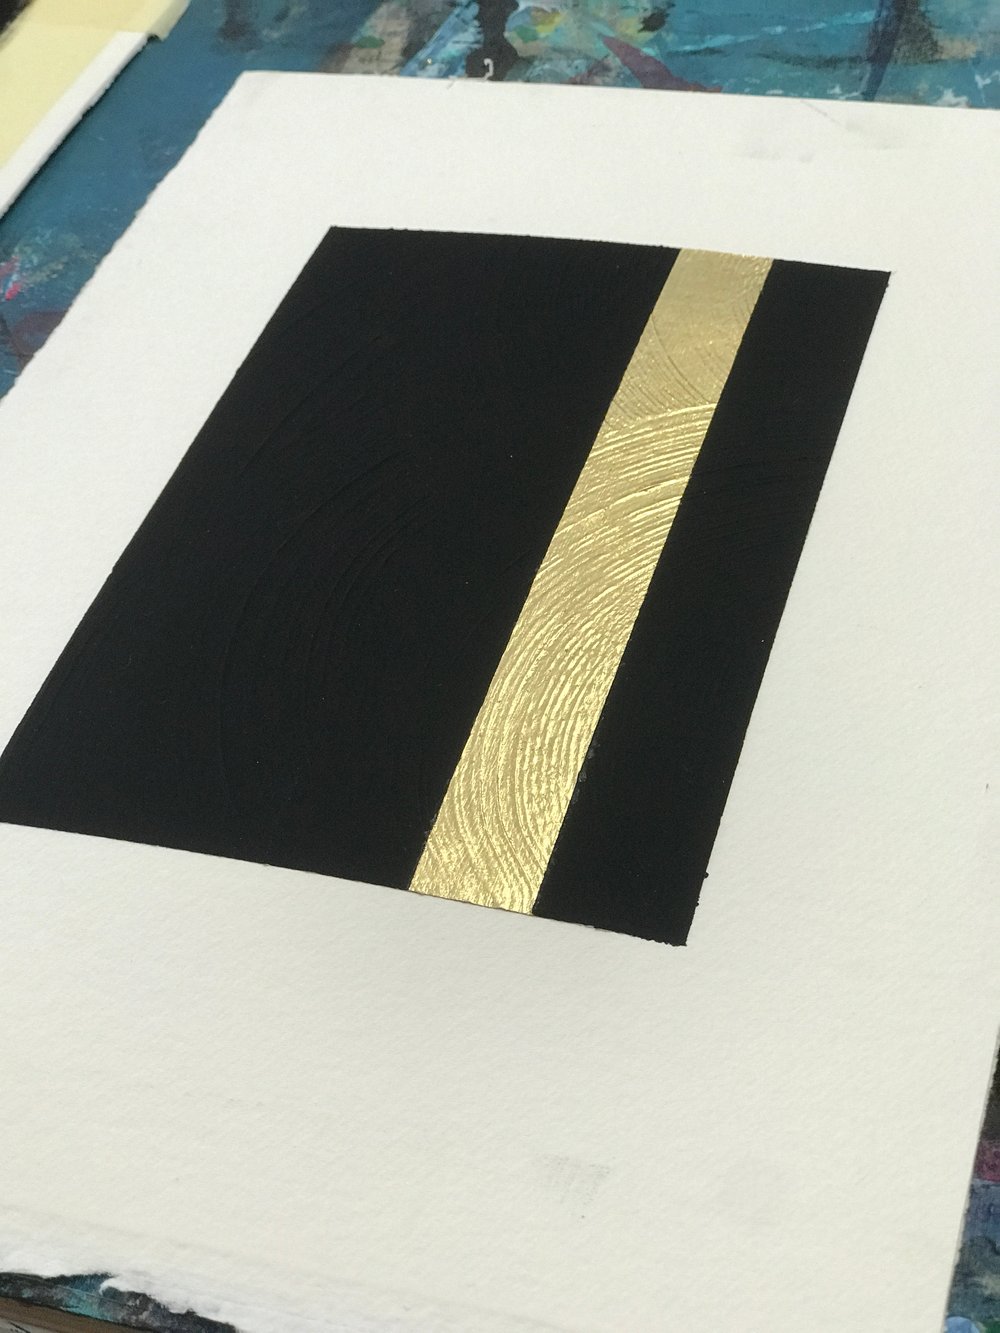 Image of Making visible the invisible study - acrylic and gold on 640 gsm 100% cotton fabriano paper